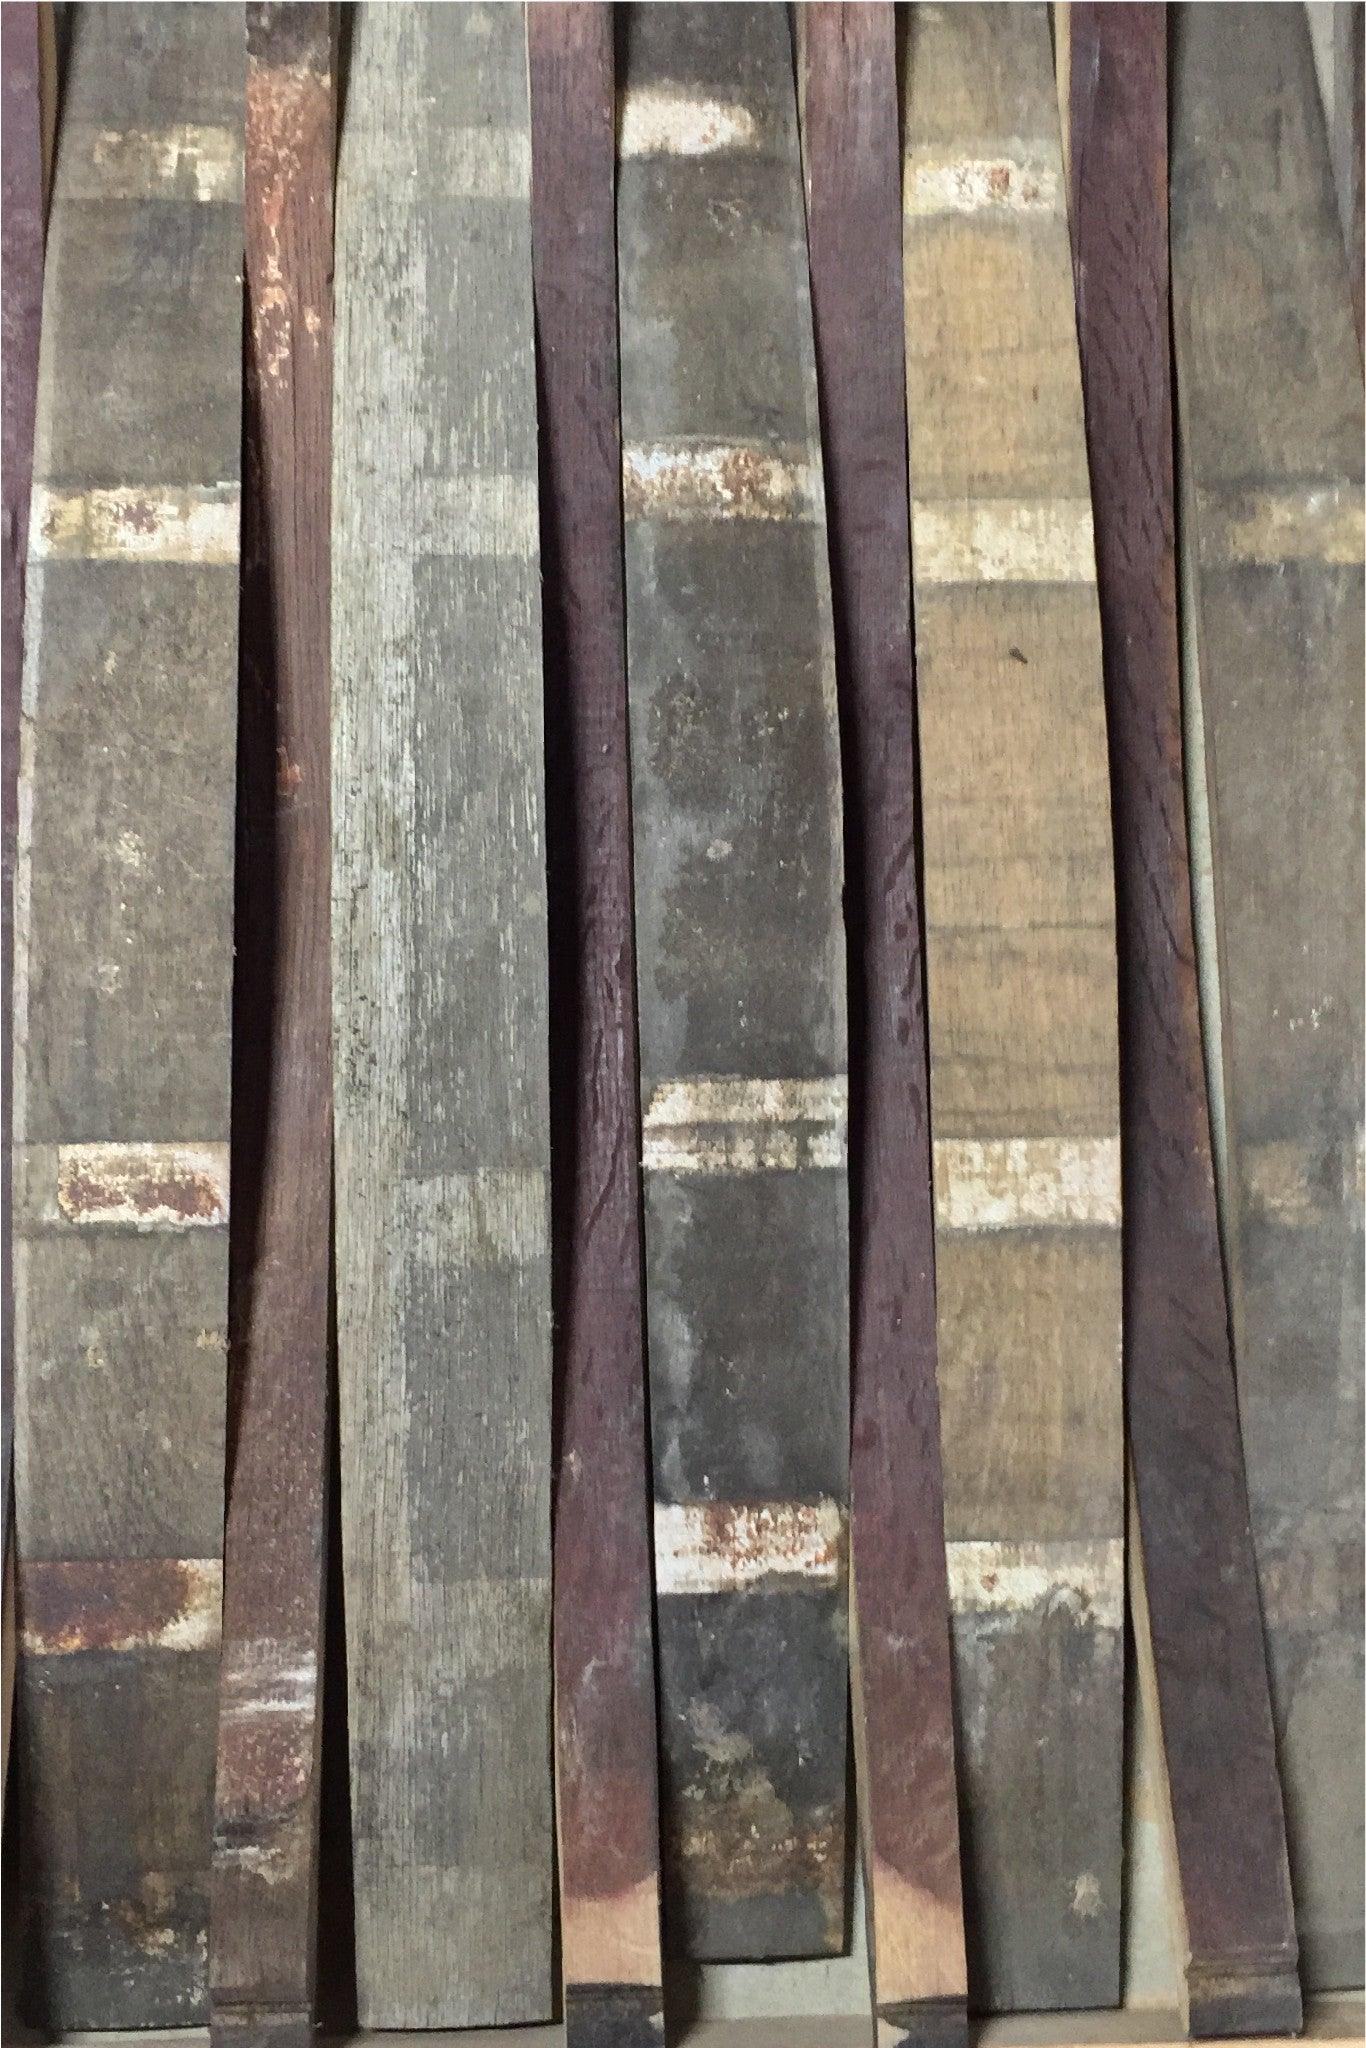 Wine Barrel Staves | Whole Staves | 10-Pack | By The Antique Barrel Collection